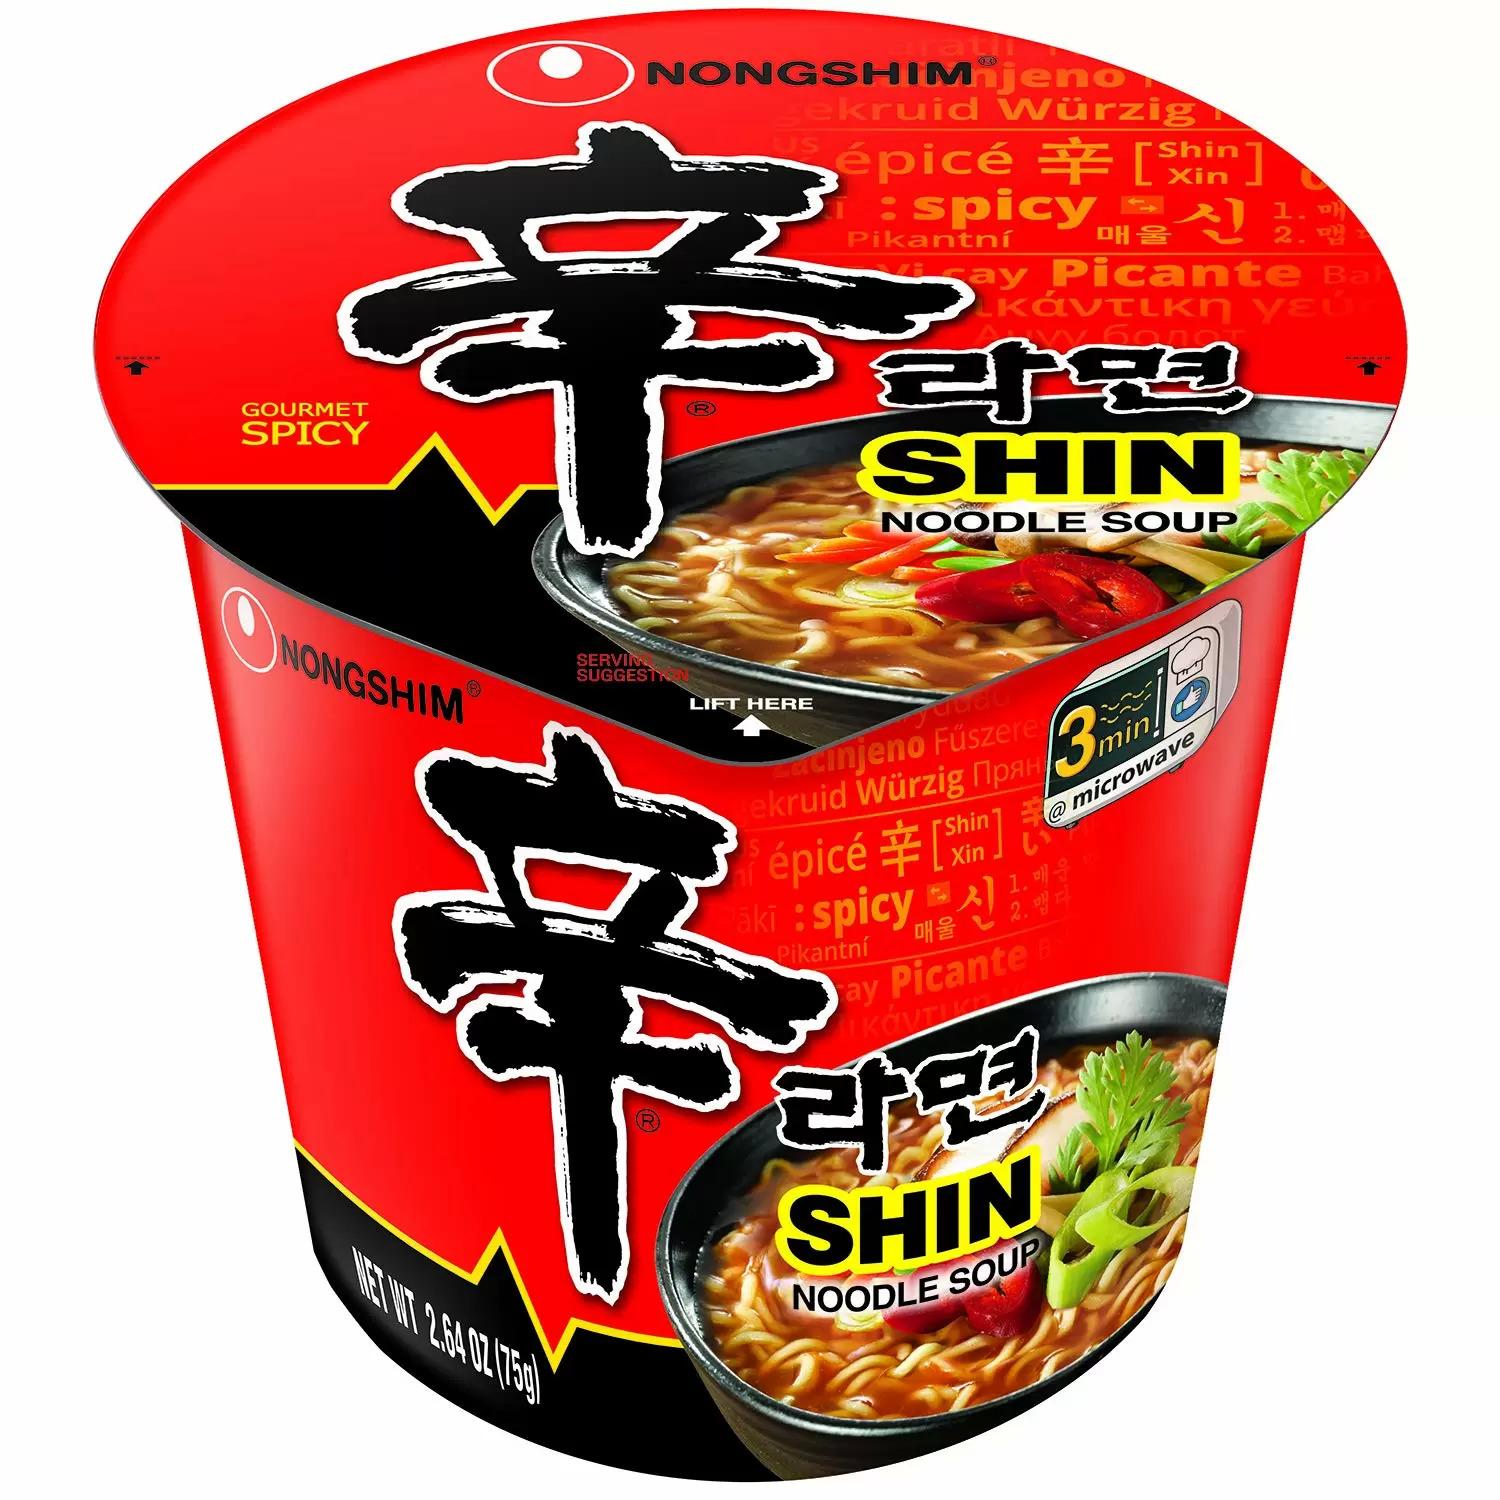 6 Nongshim Shin Cup Noodle Soup for $5.62 Shipped